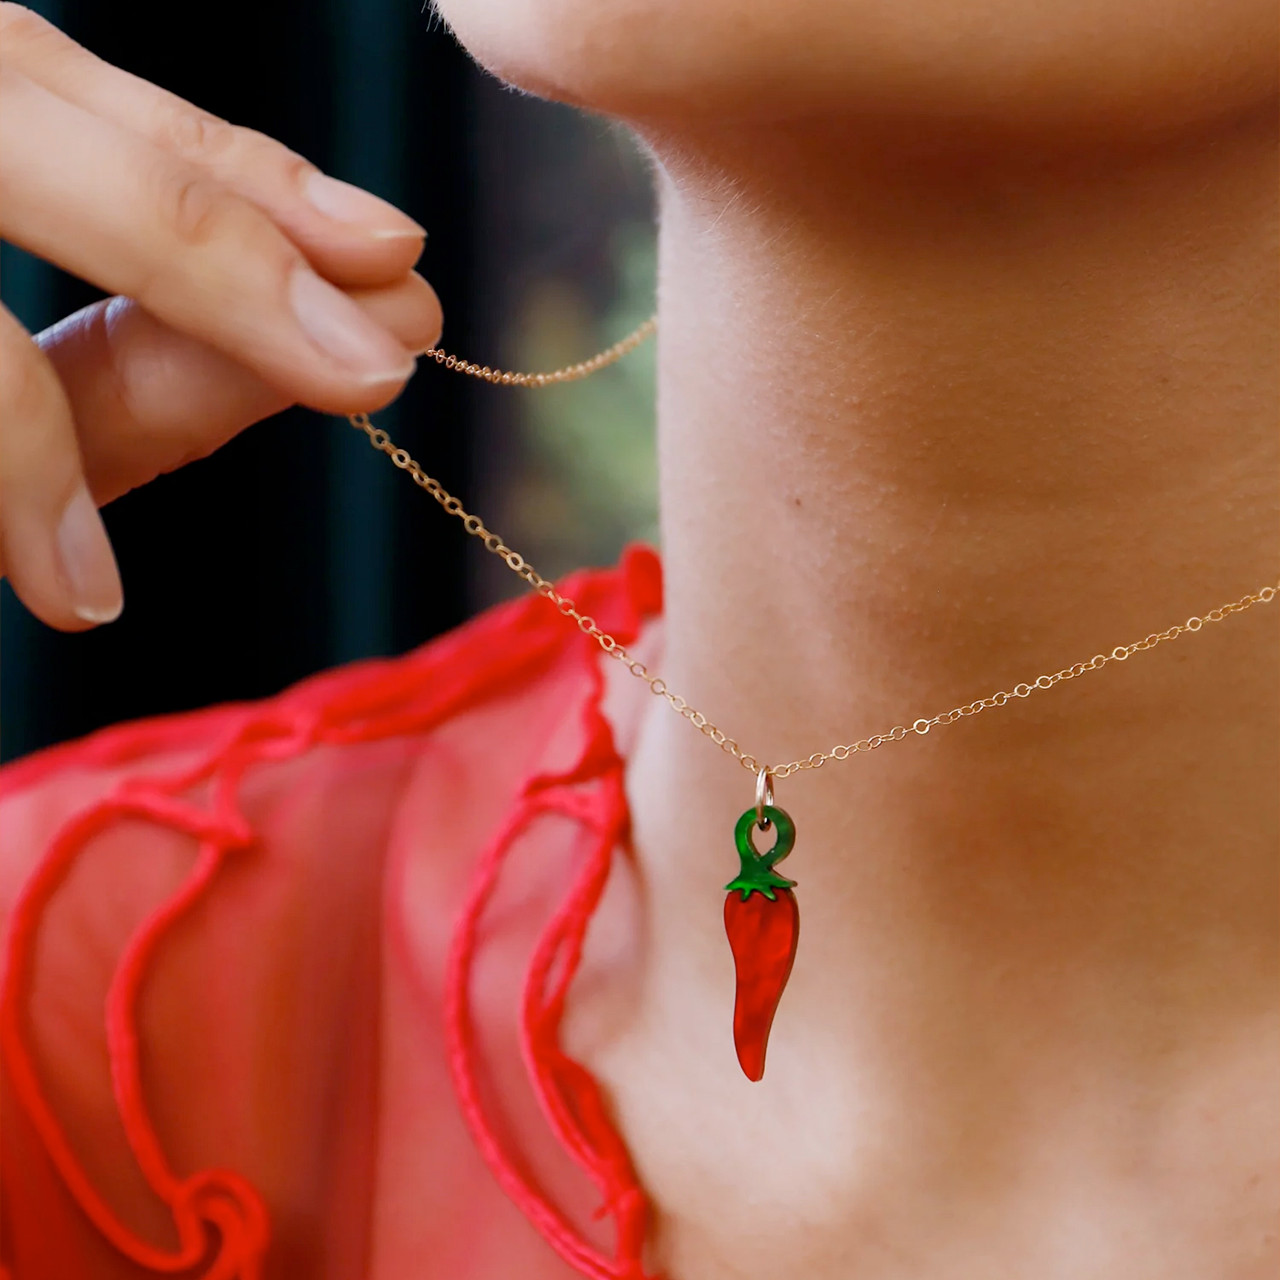 RED CHILLI PEPPER-SHAPED NECKLACE - CHILLE 2.0 GOLD